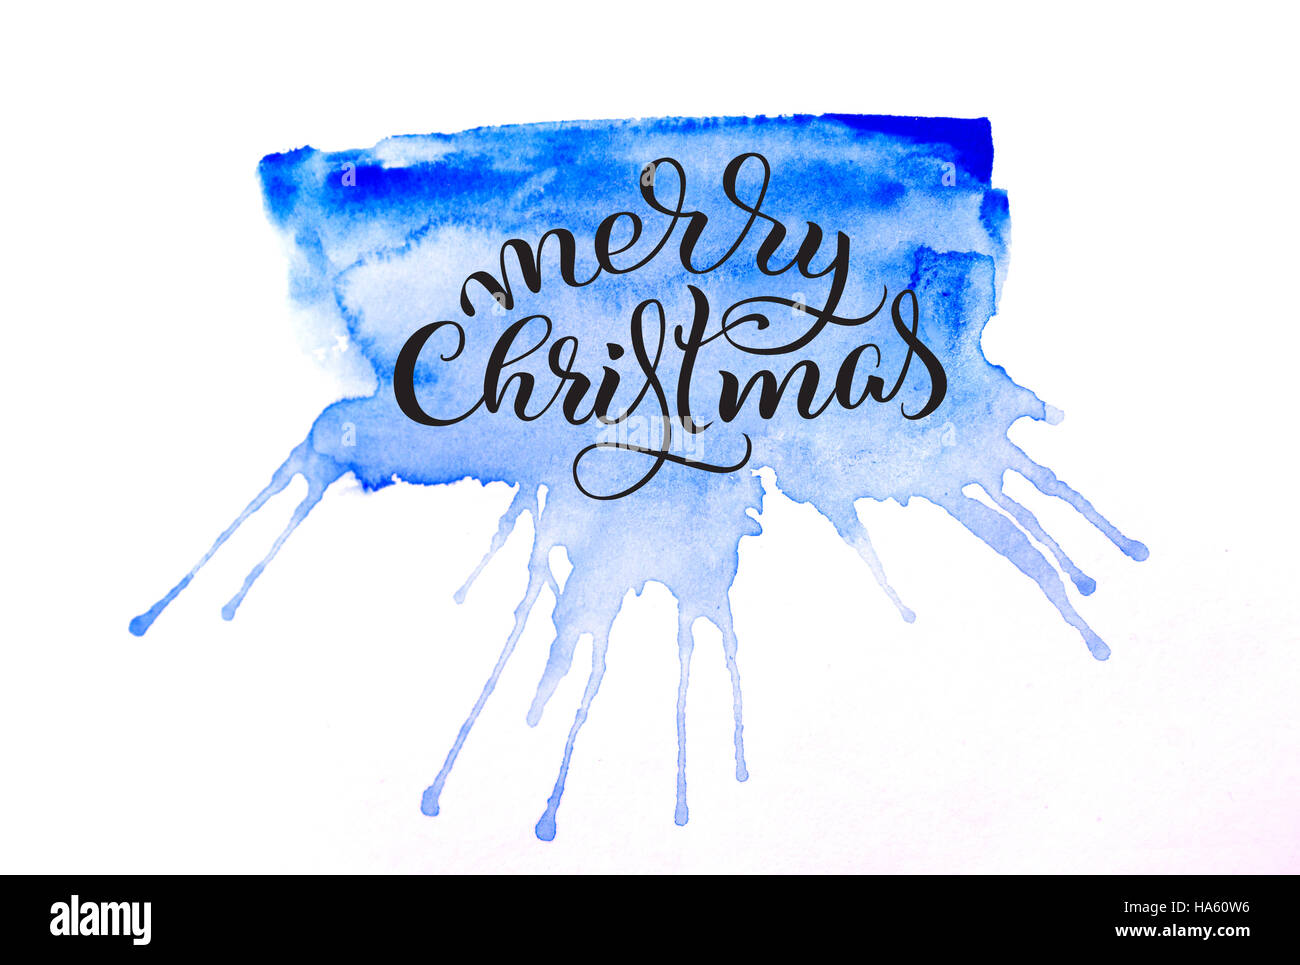 abstract background blue tone and the text of Merry Christmas. Lettering calligraphy Stock Photo